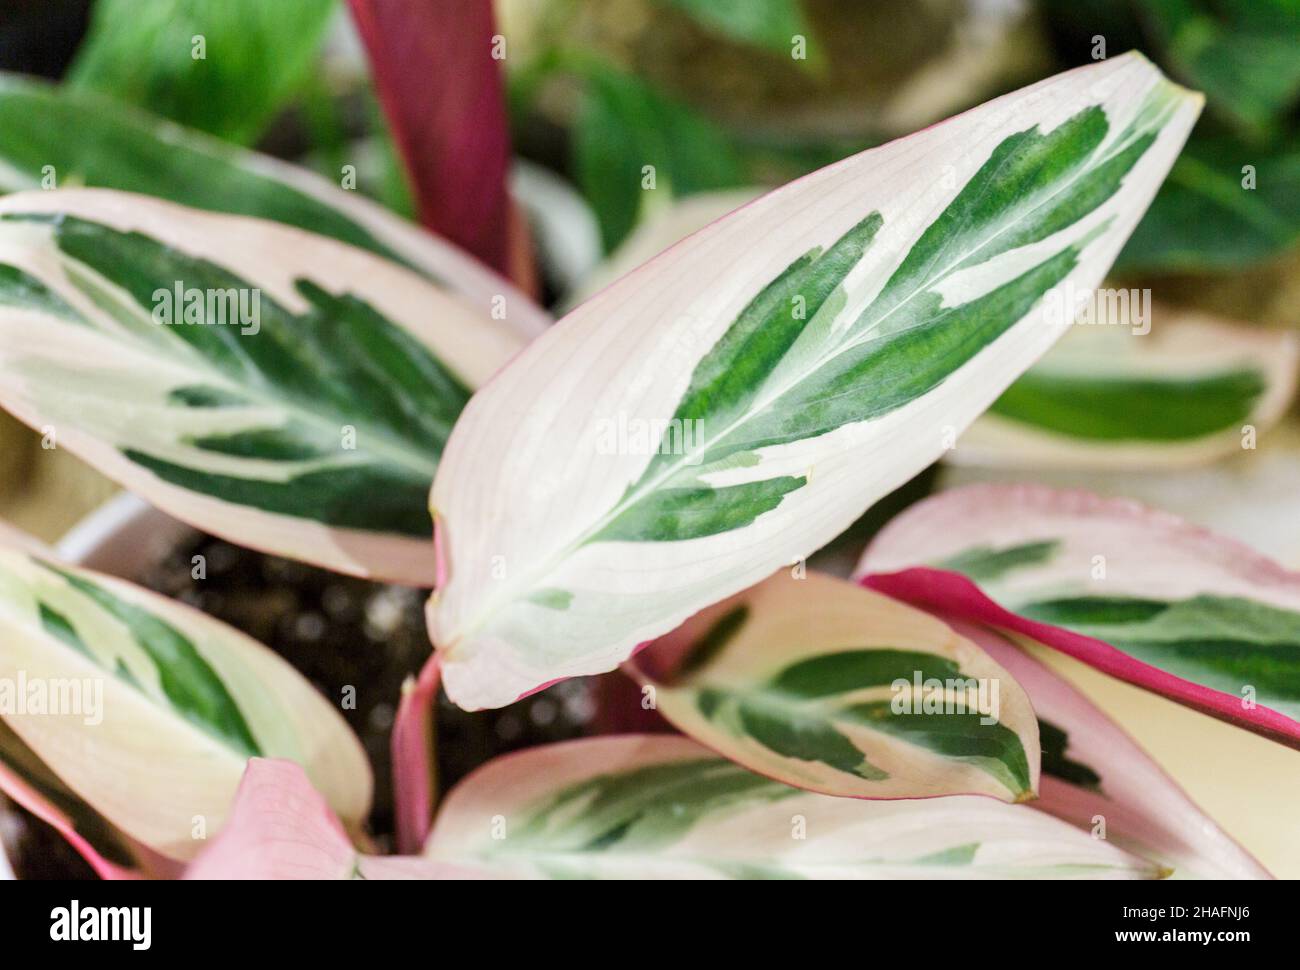 Stromanthe plant with white and pink stripes in a pot on the table. Indoor garden, home gardening. Home interior with flowers, close up Stock Photo